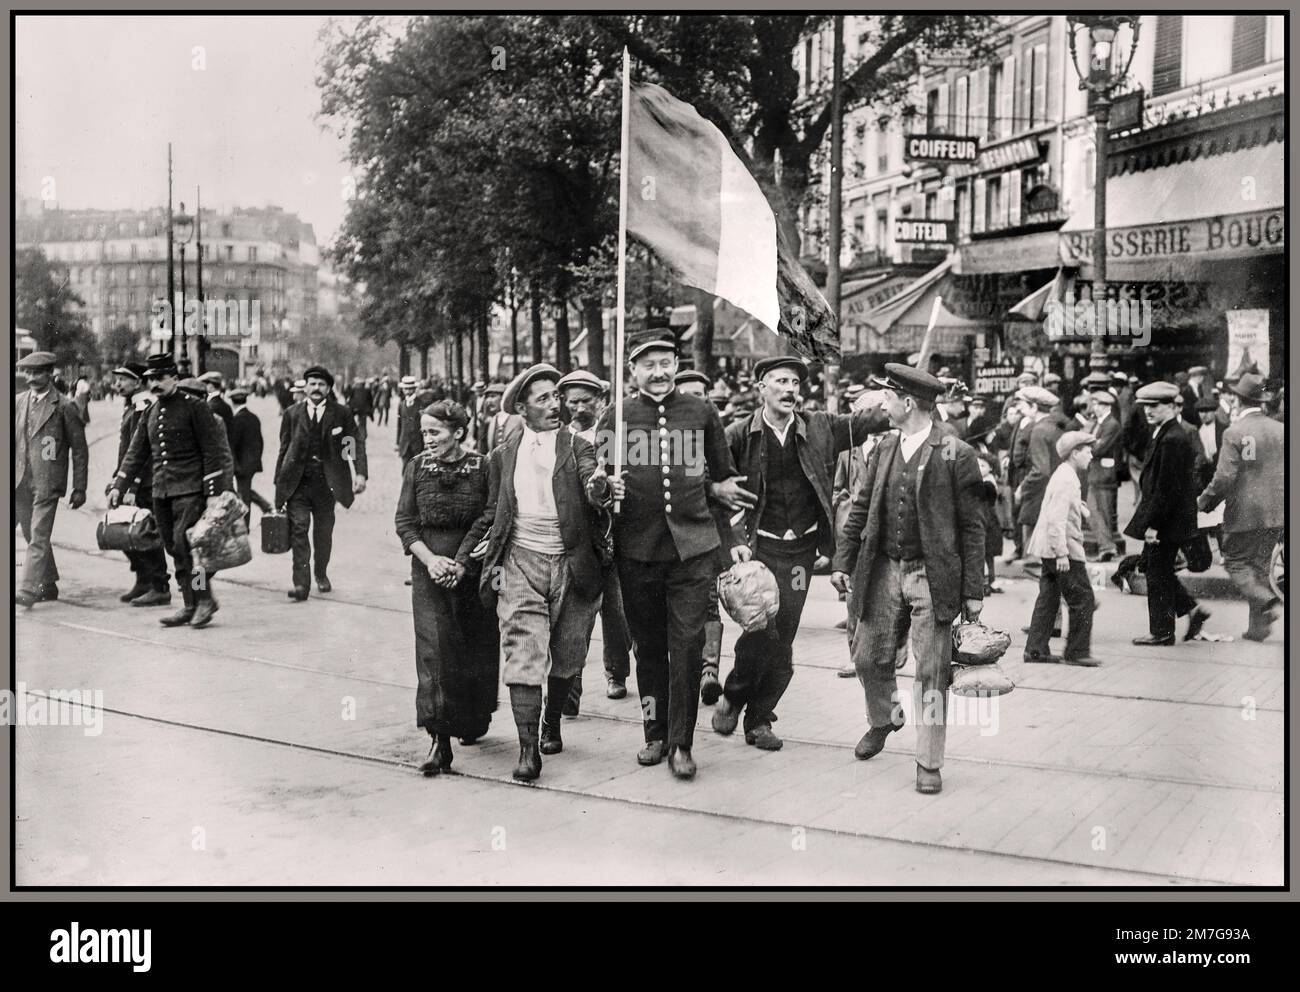 WW1 Paris Patriotic French Reservists going to war via the Rail station in Paris France. French reservist soldiers marching in front of the Brasserie Bougeneaux (9 Rue de Strasbourg), Paris, France, on their way to the Gare de l'Est, to the front by train during World War I. Date between ca. 1914 and ca. 1915 Stock Photo